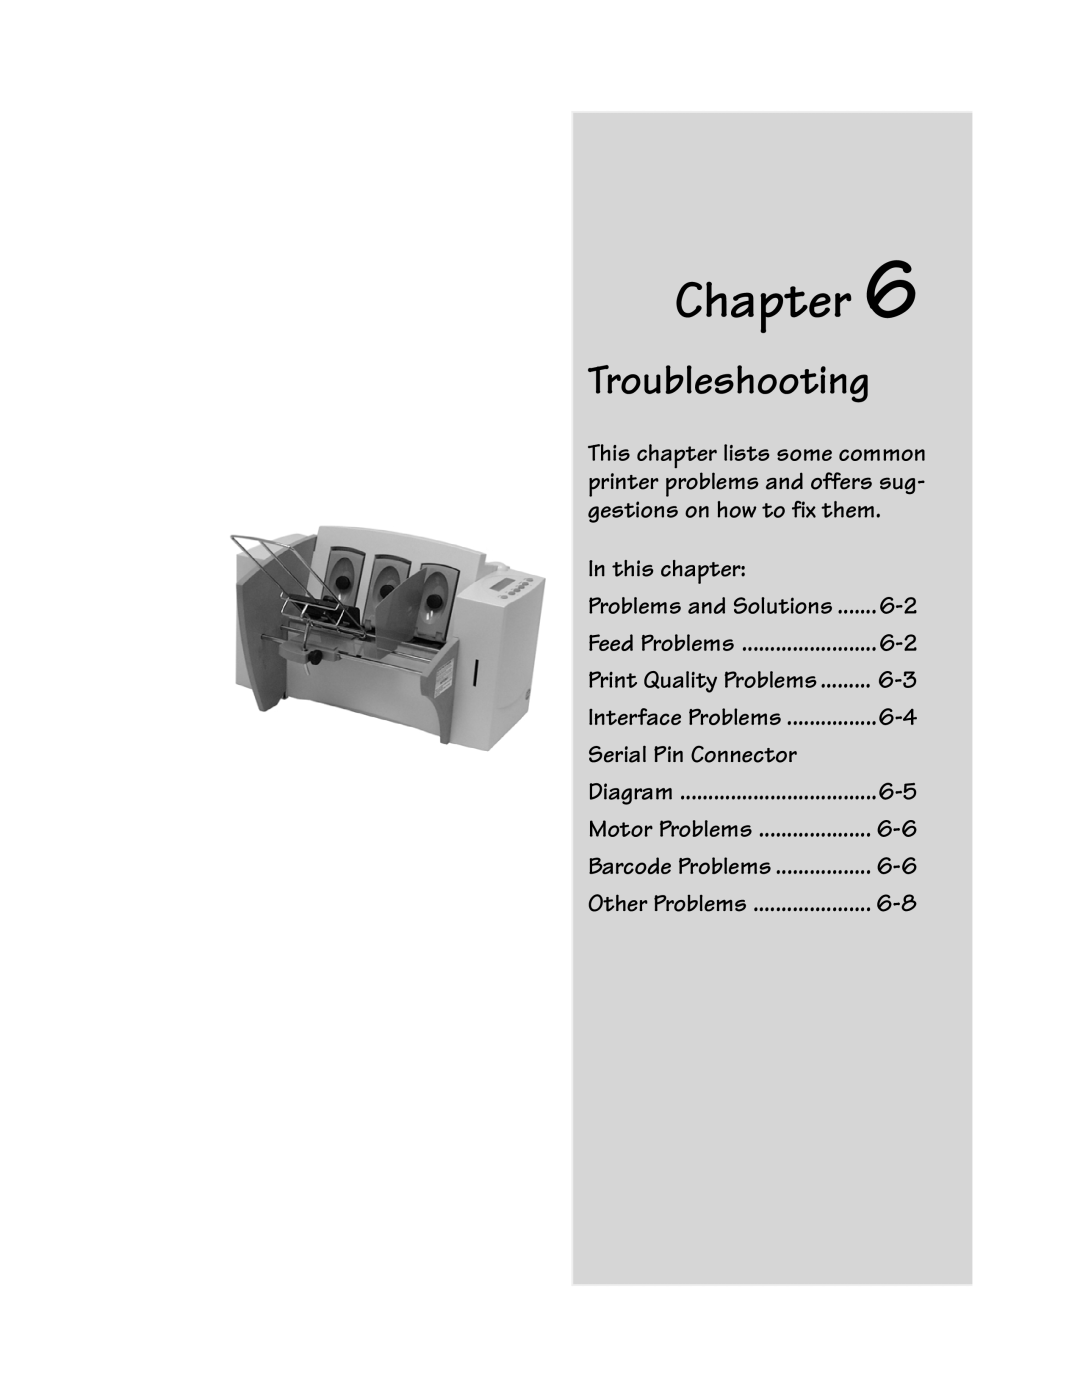 Pitney Bowes W680 Troubleshooting, Serial Pin Connector, Problems and Solutions, Chapter, In this chapter, Motor Problems 